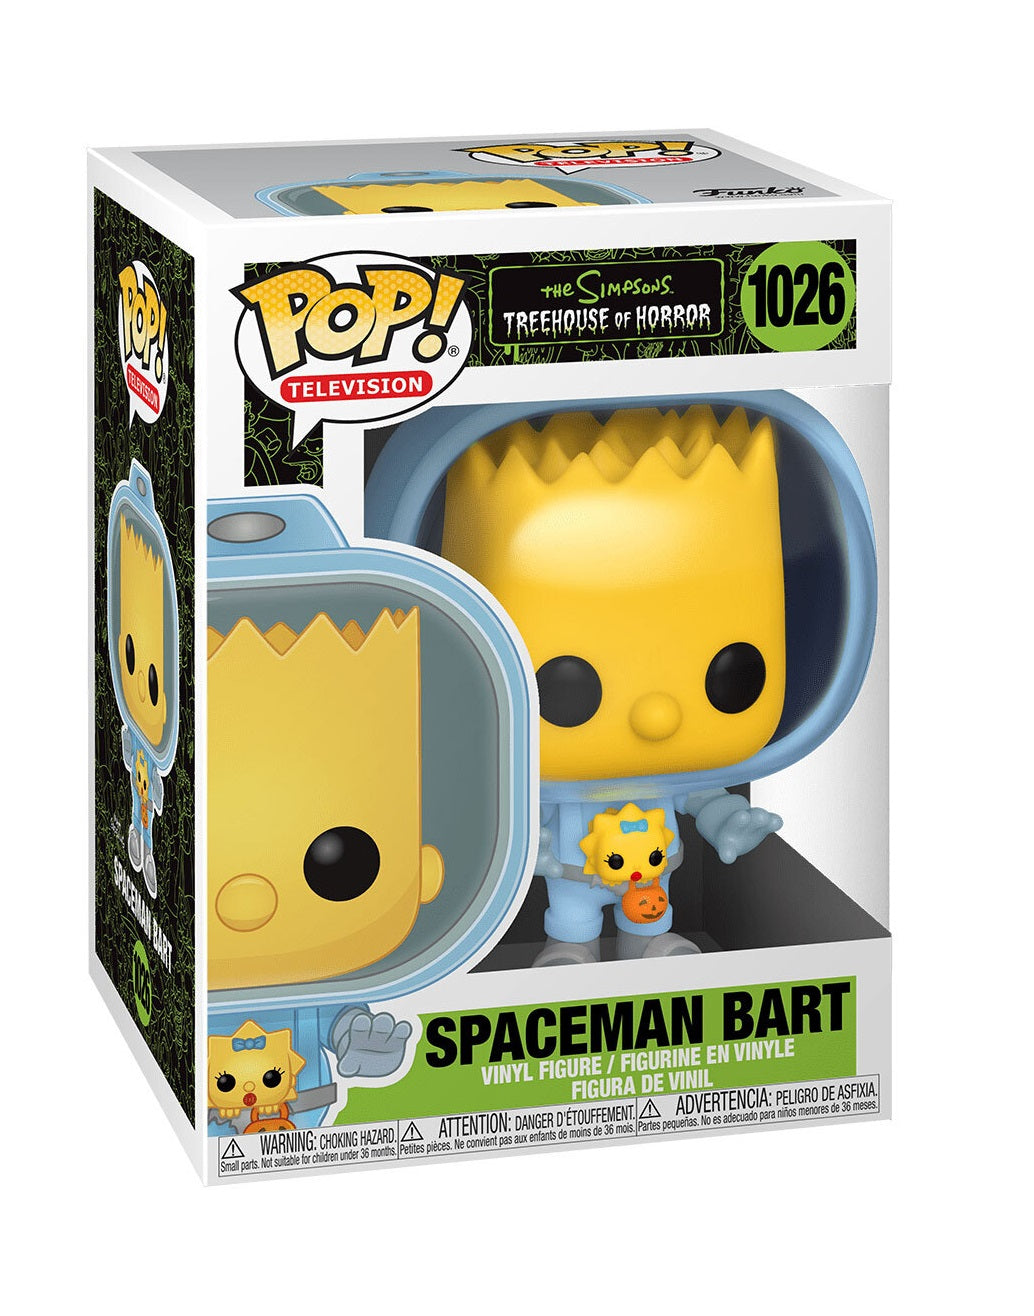 The Simpsons Treehouse of Horror Spaceman Bart vinyl figure